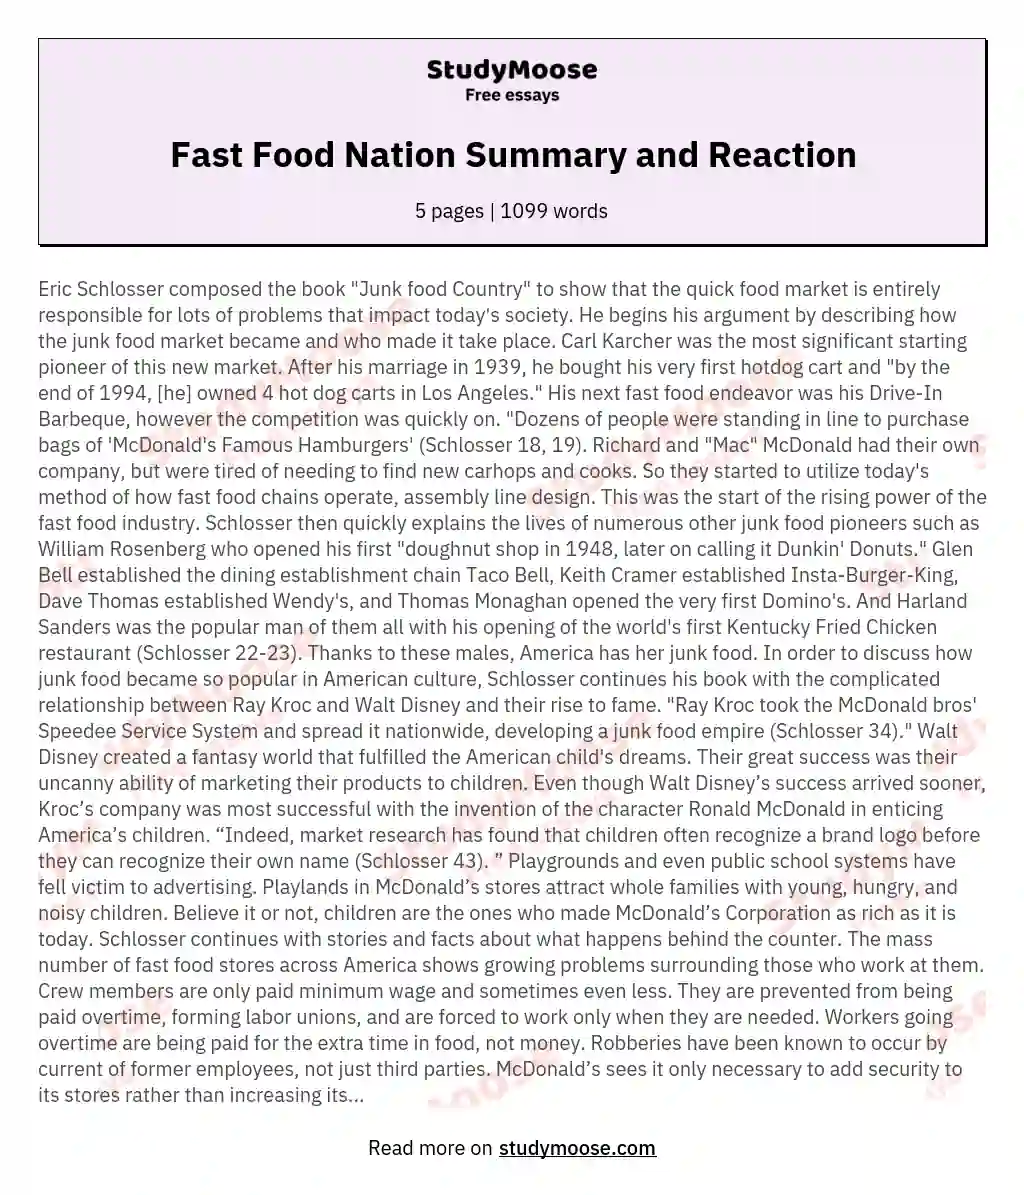 Fast Food Nation Summary and Reaction essay